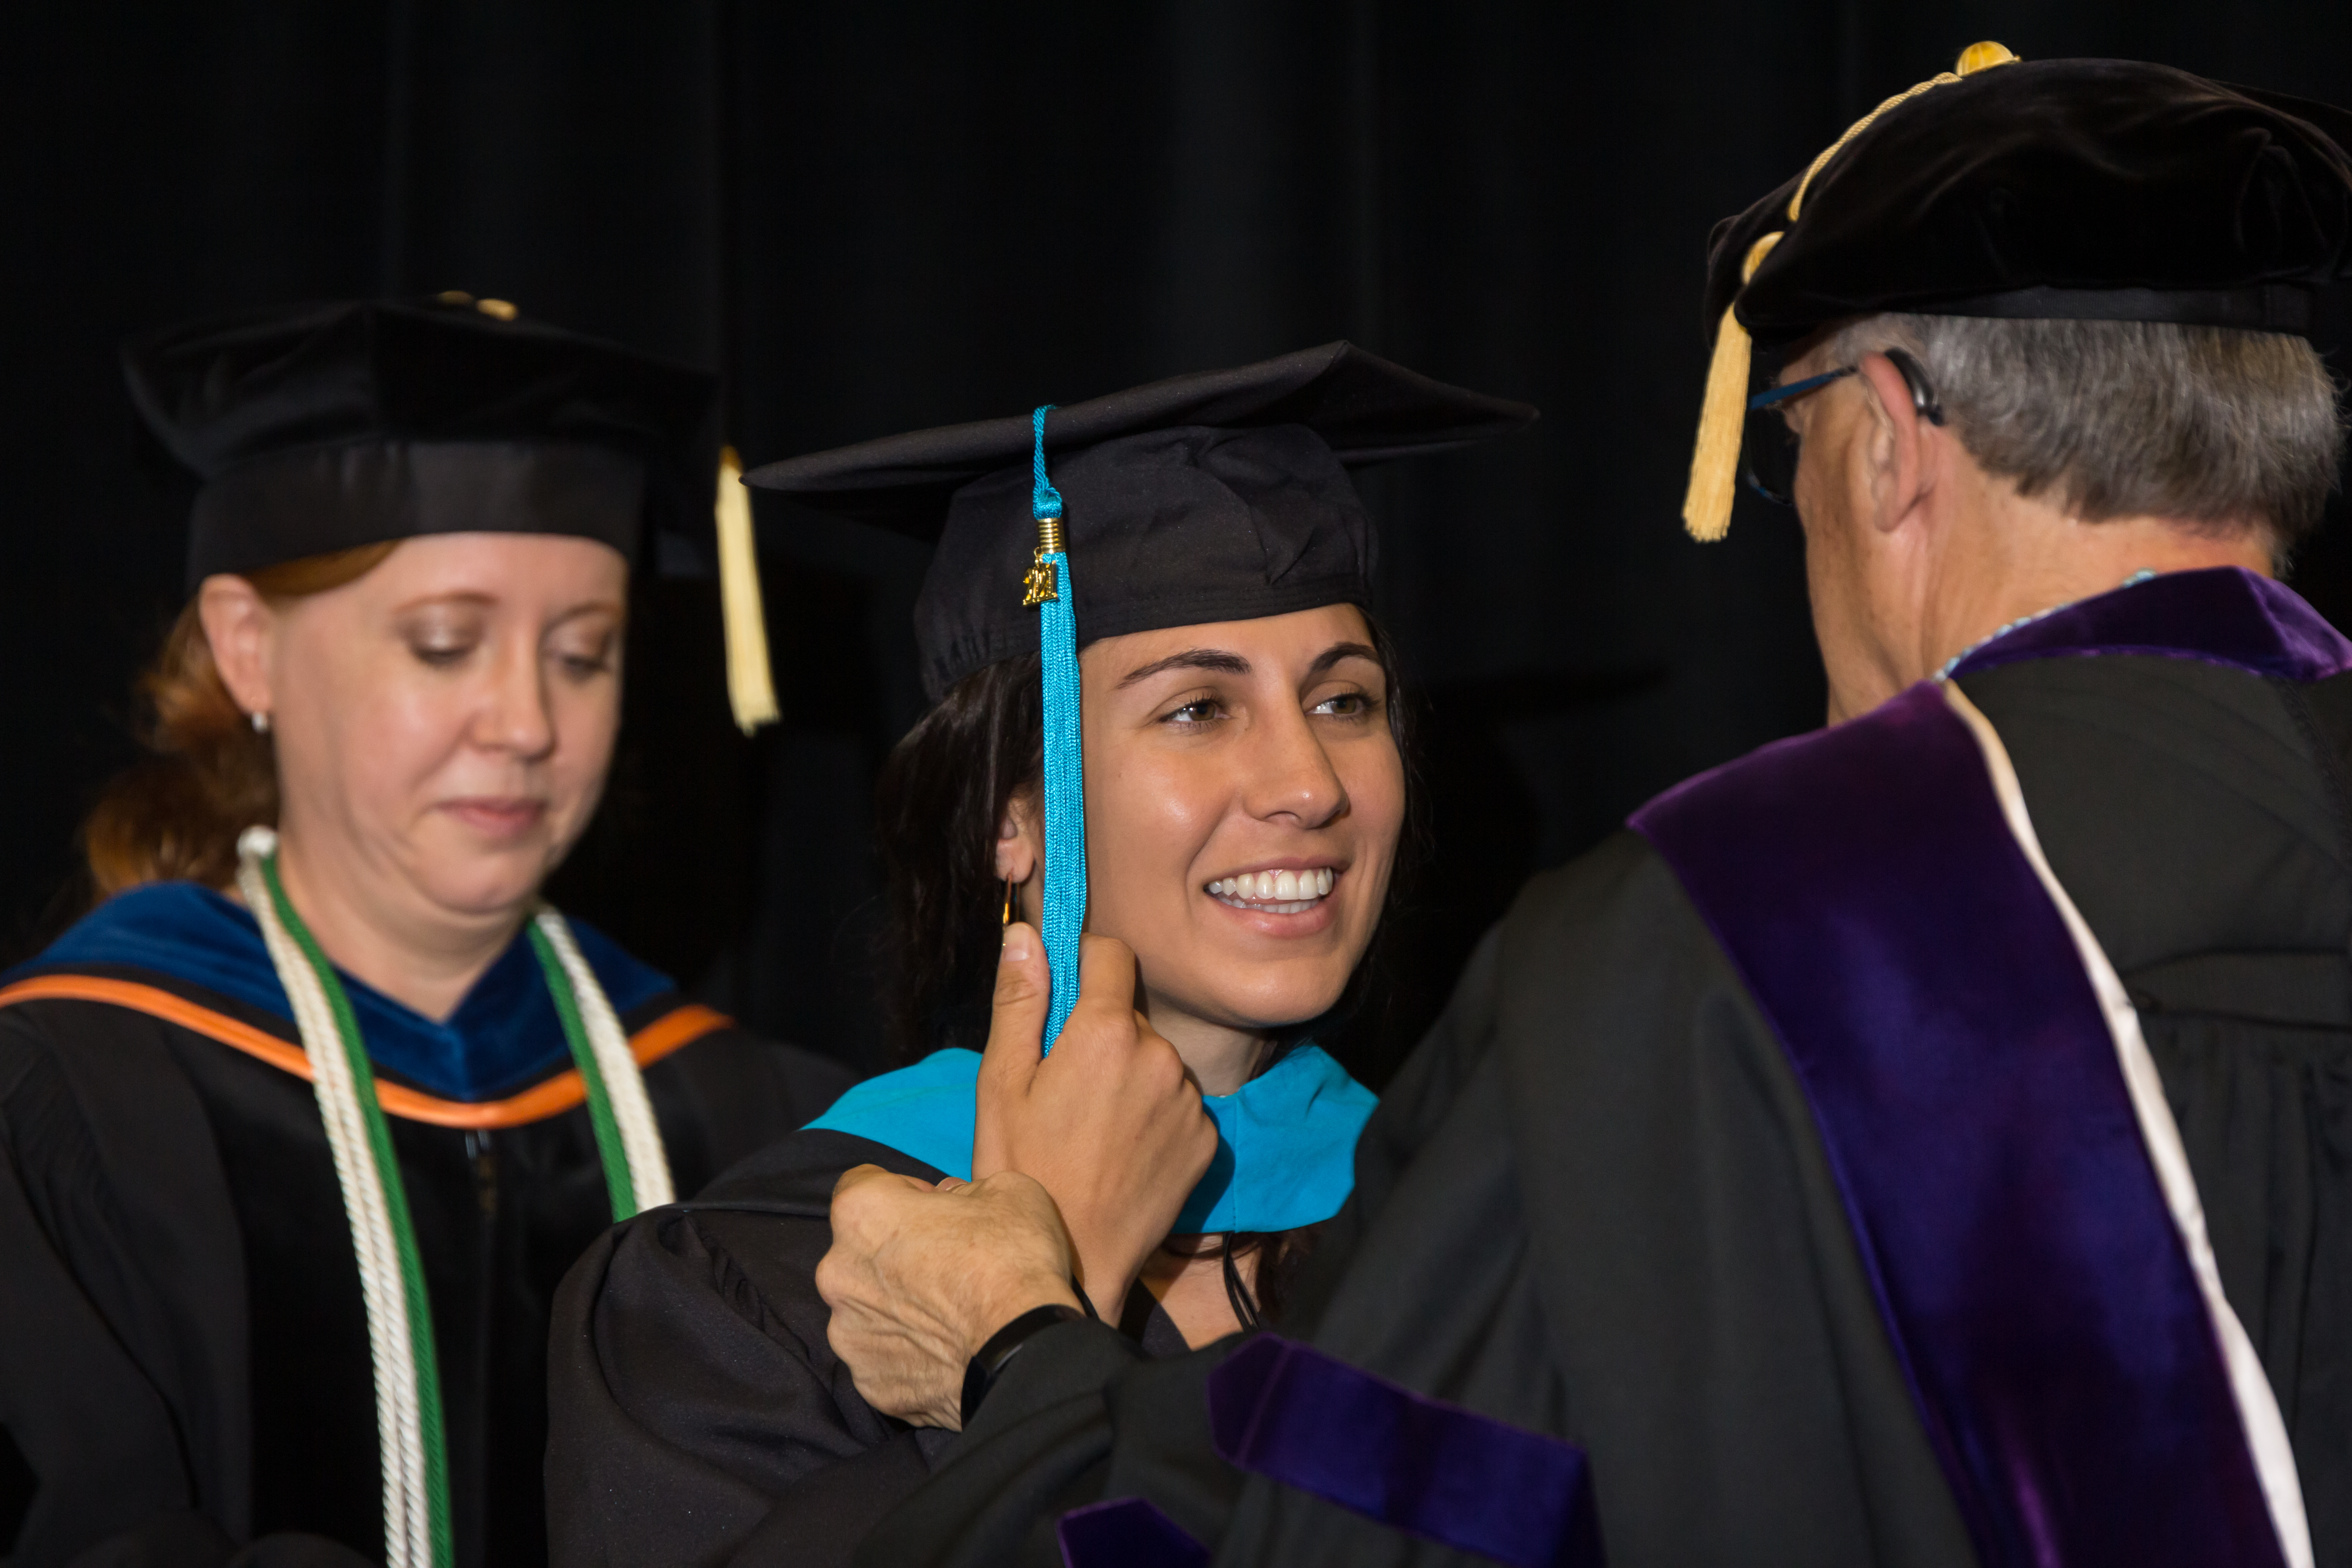 UNC MPA Graduate is Hooded During Spring Commencement 